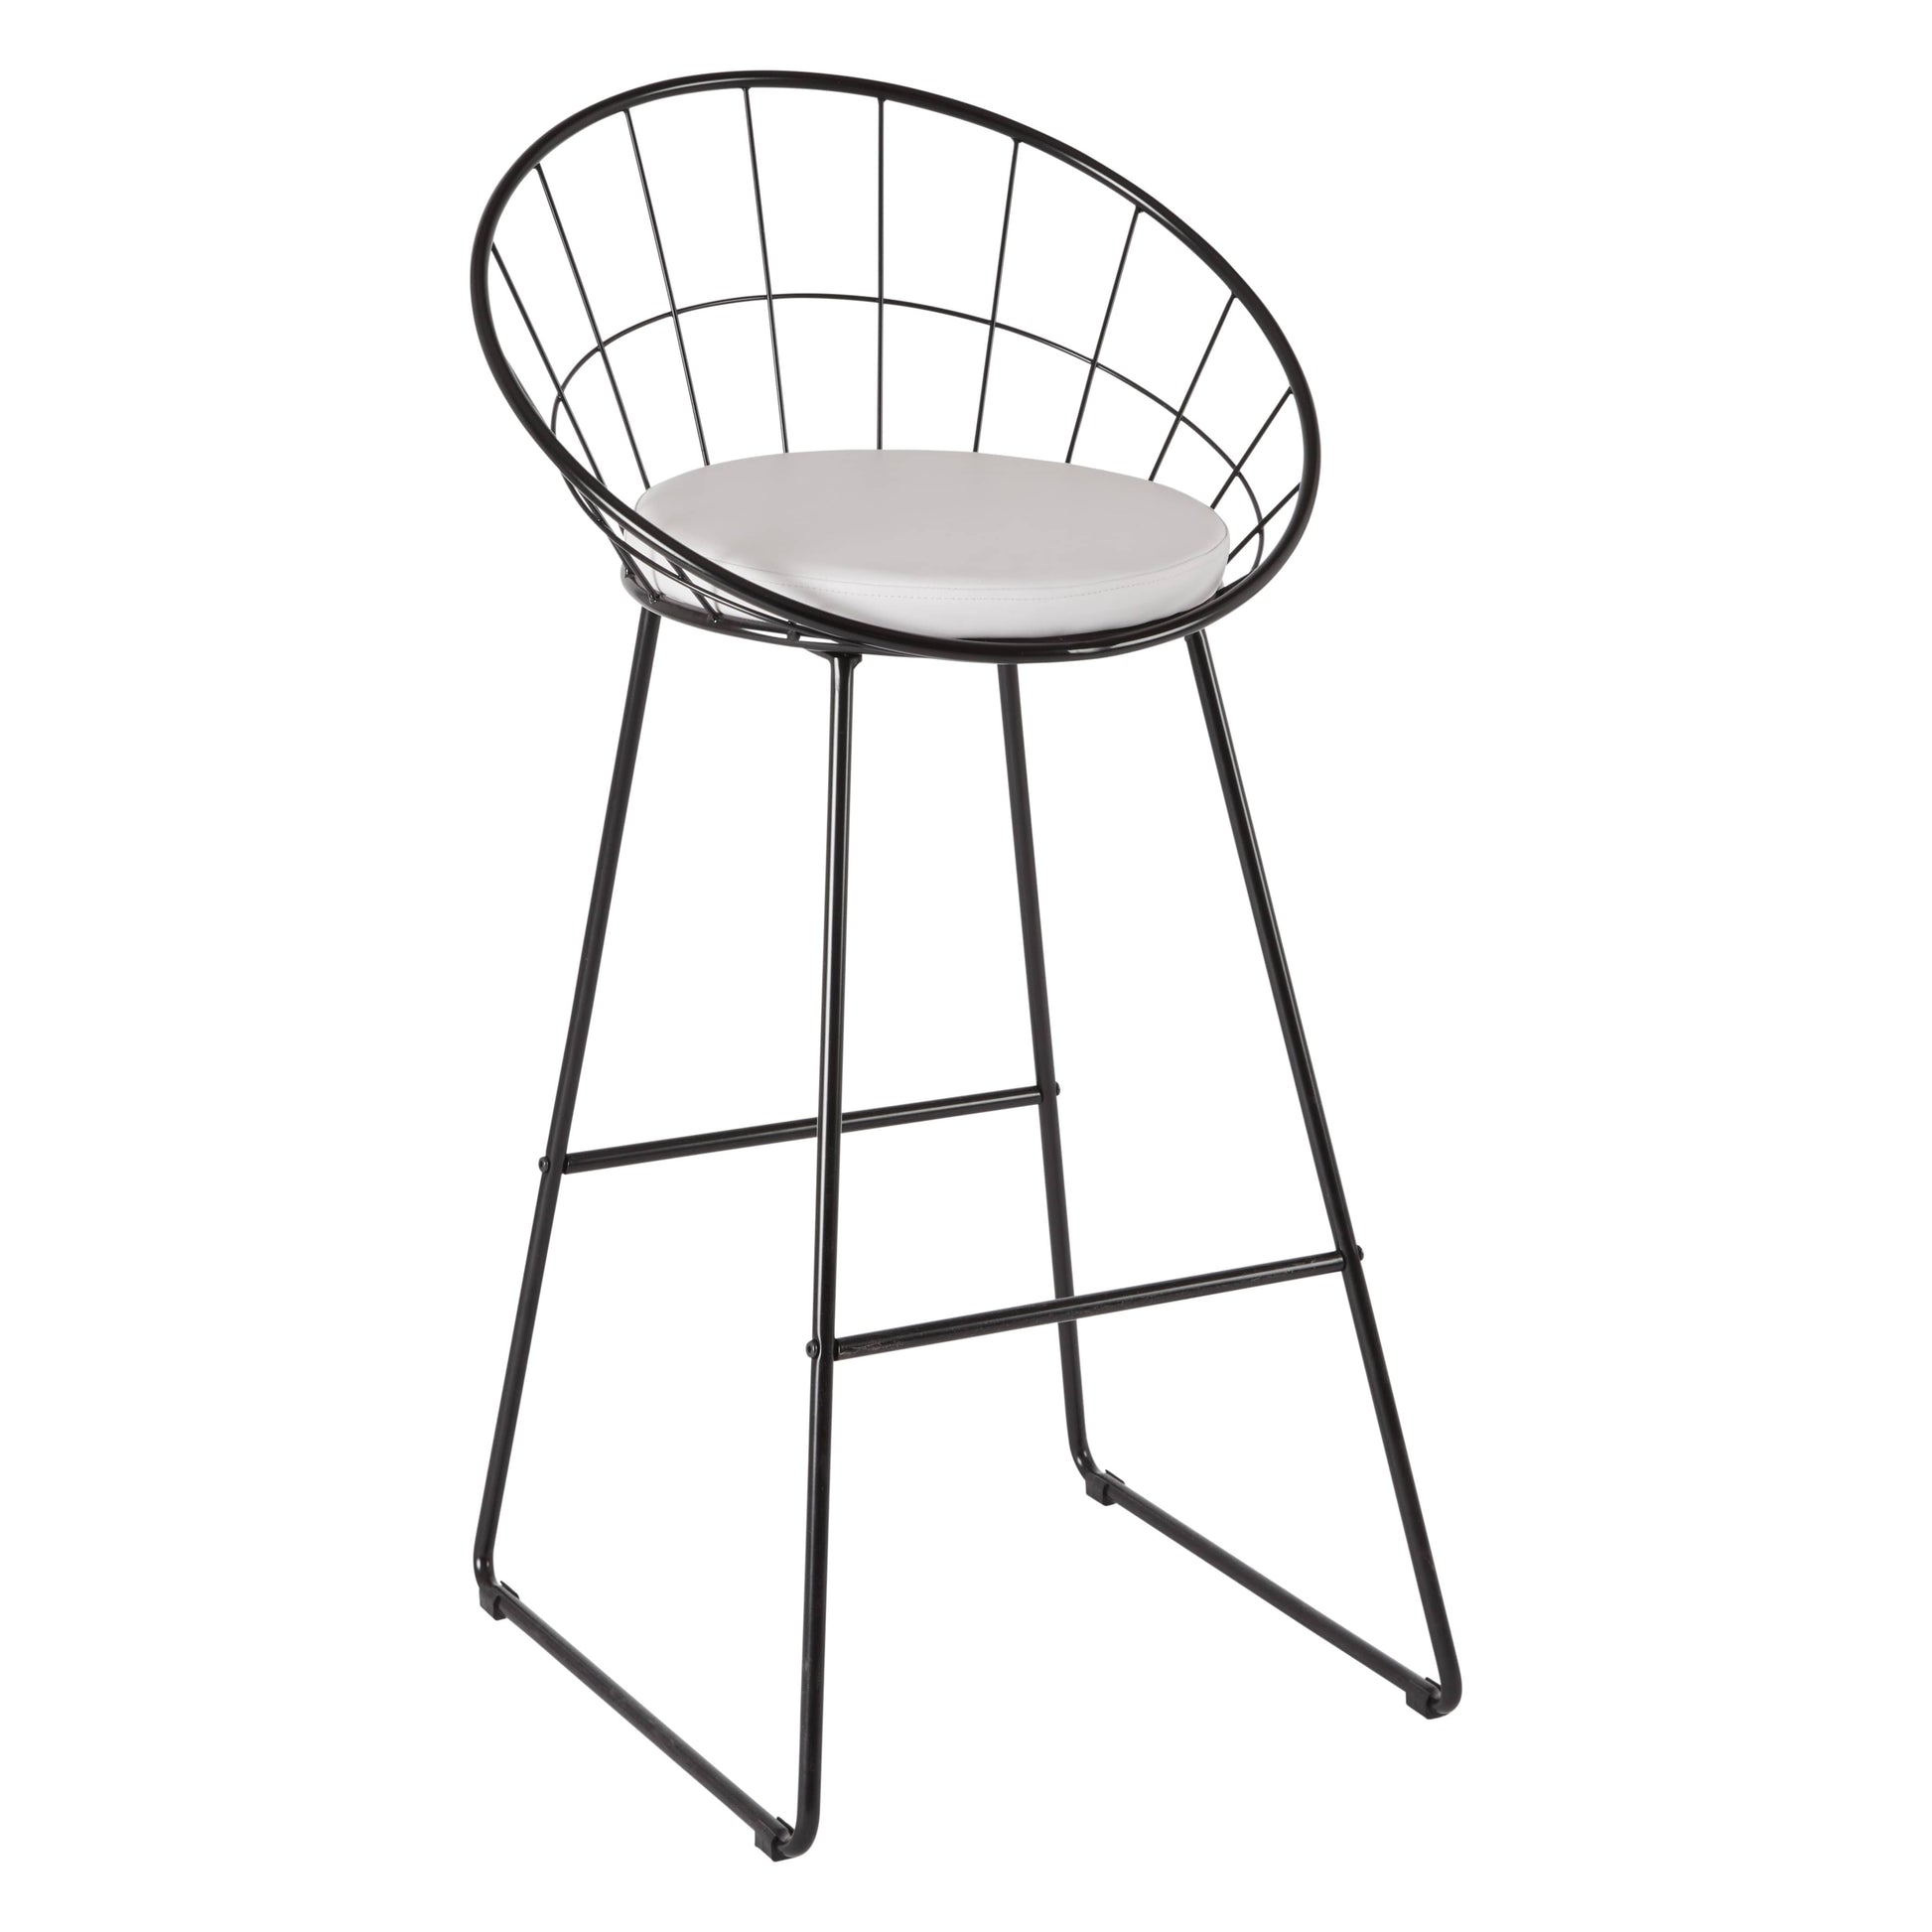 Jimmy bar table and stools - Laura James